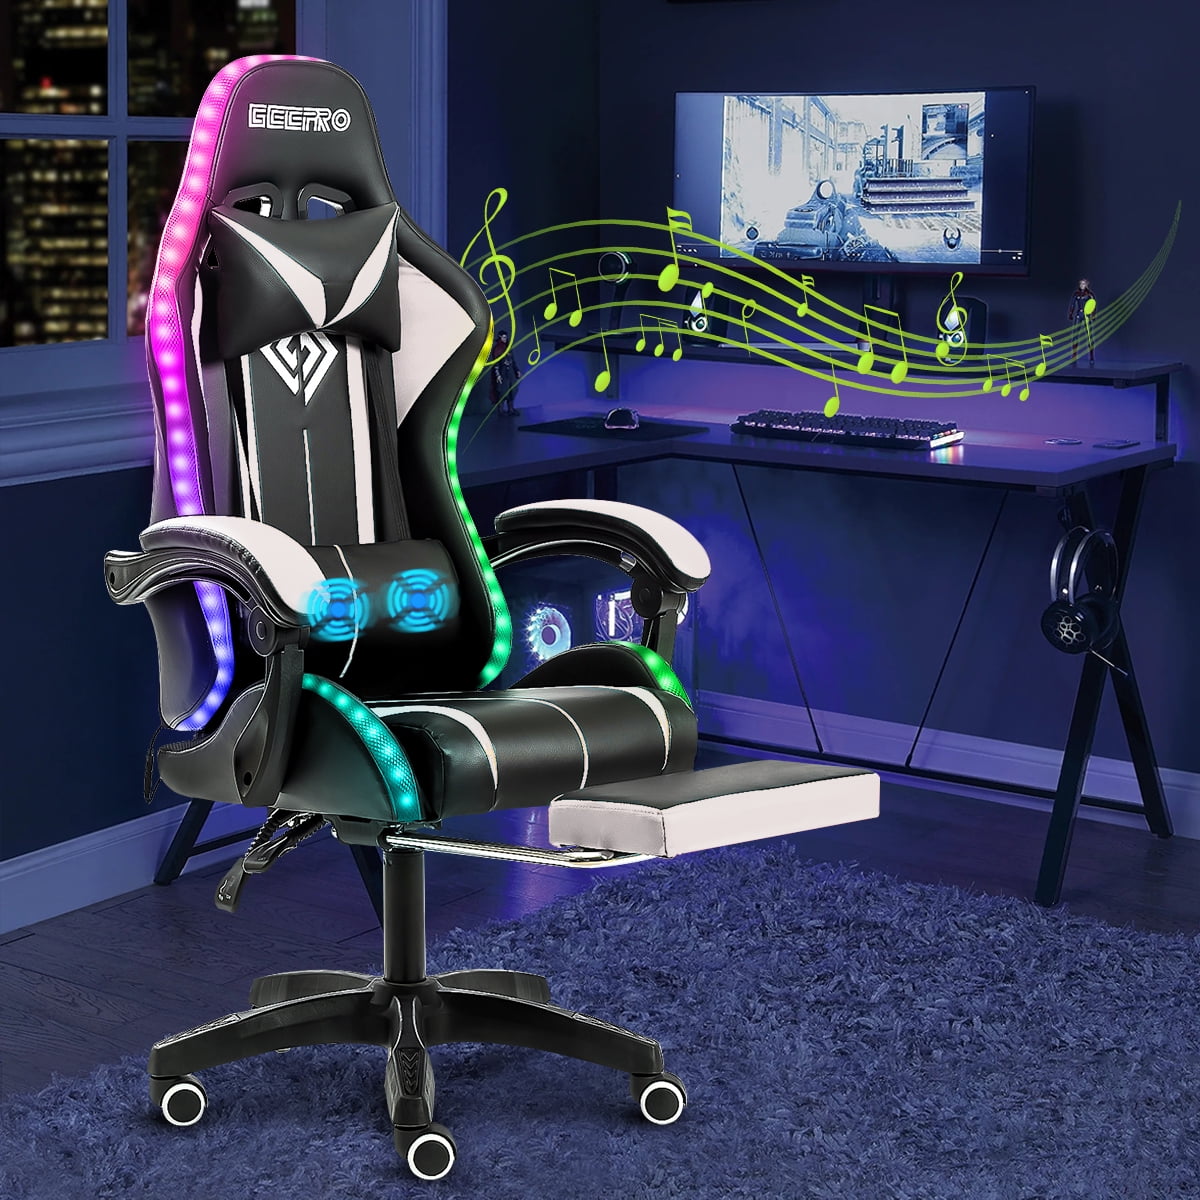 Yellow PC Gaming Chair Office Chair LED lights racing gaming chair for adults height adjustable lying video game chair esports gaming chair 